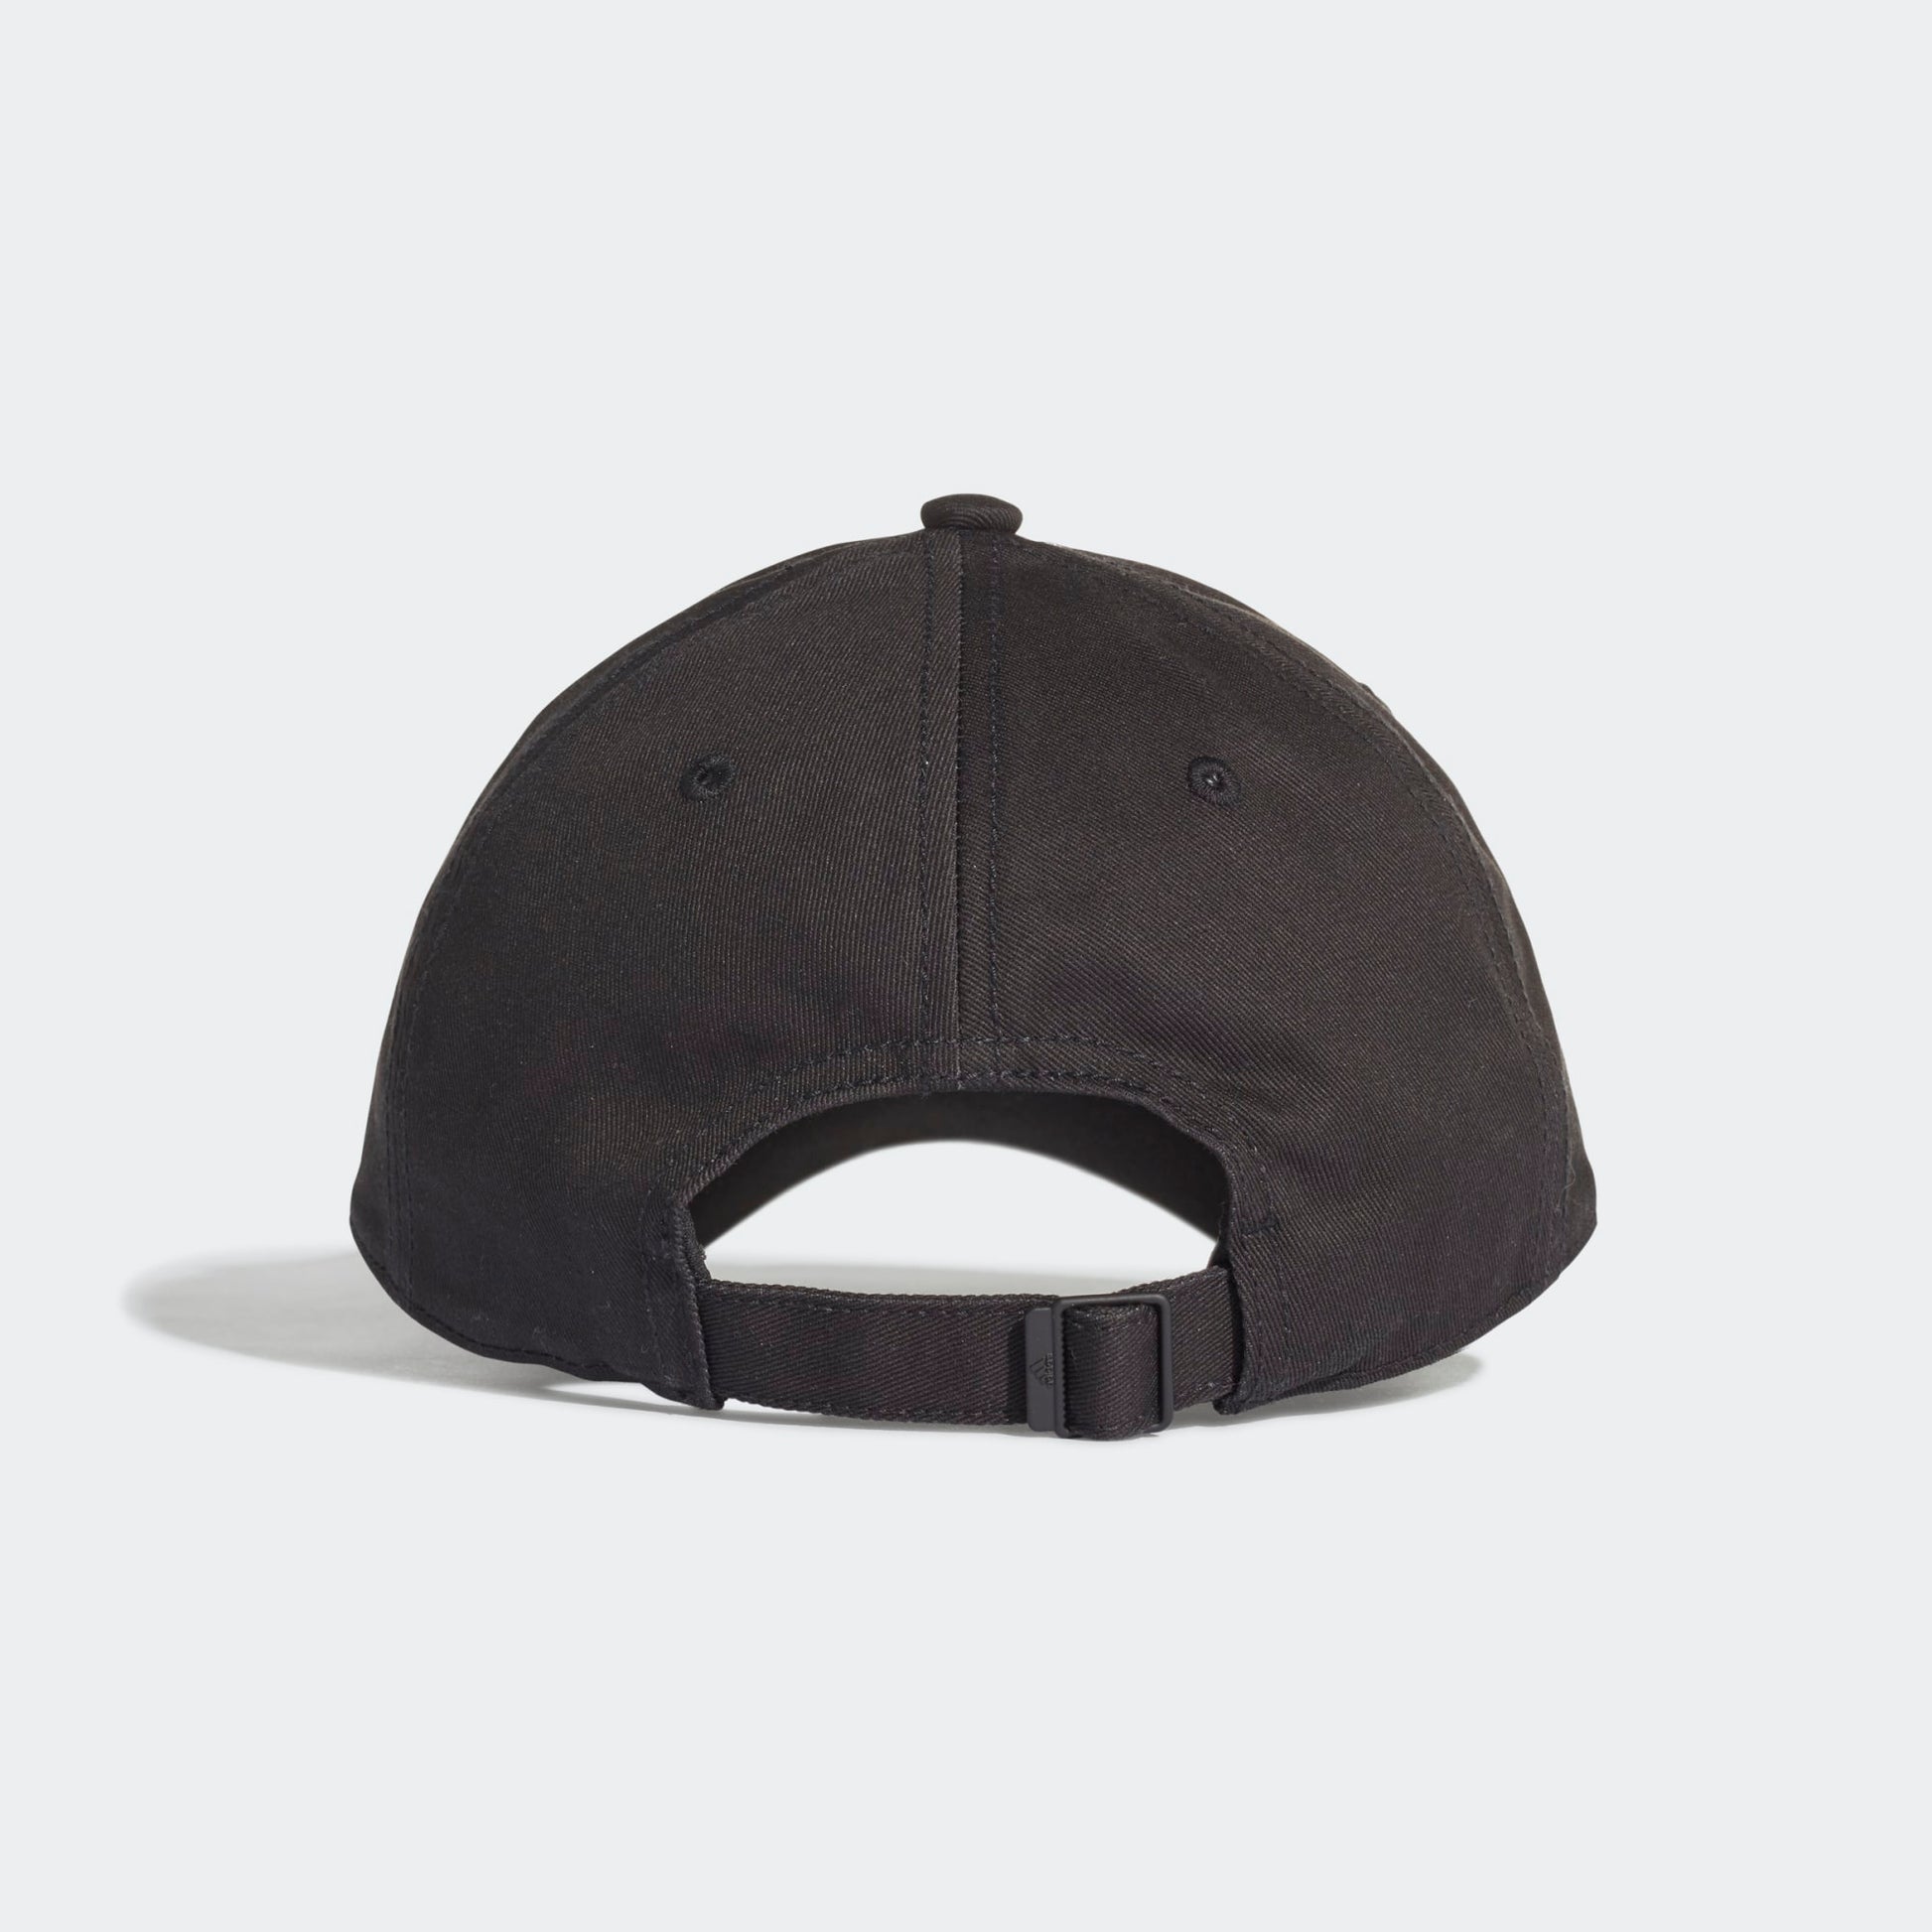 Six-Panel Classic 3-Stripes Cap in Black - ROOYAS